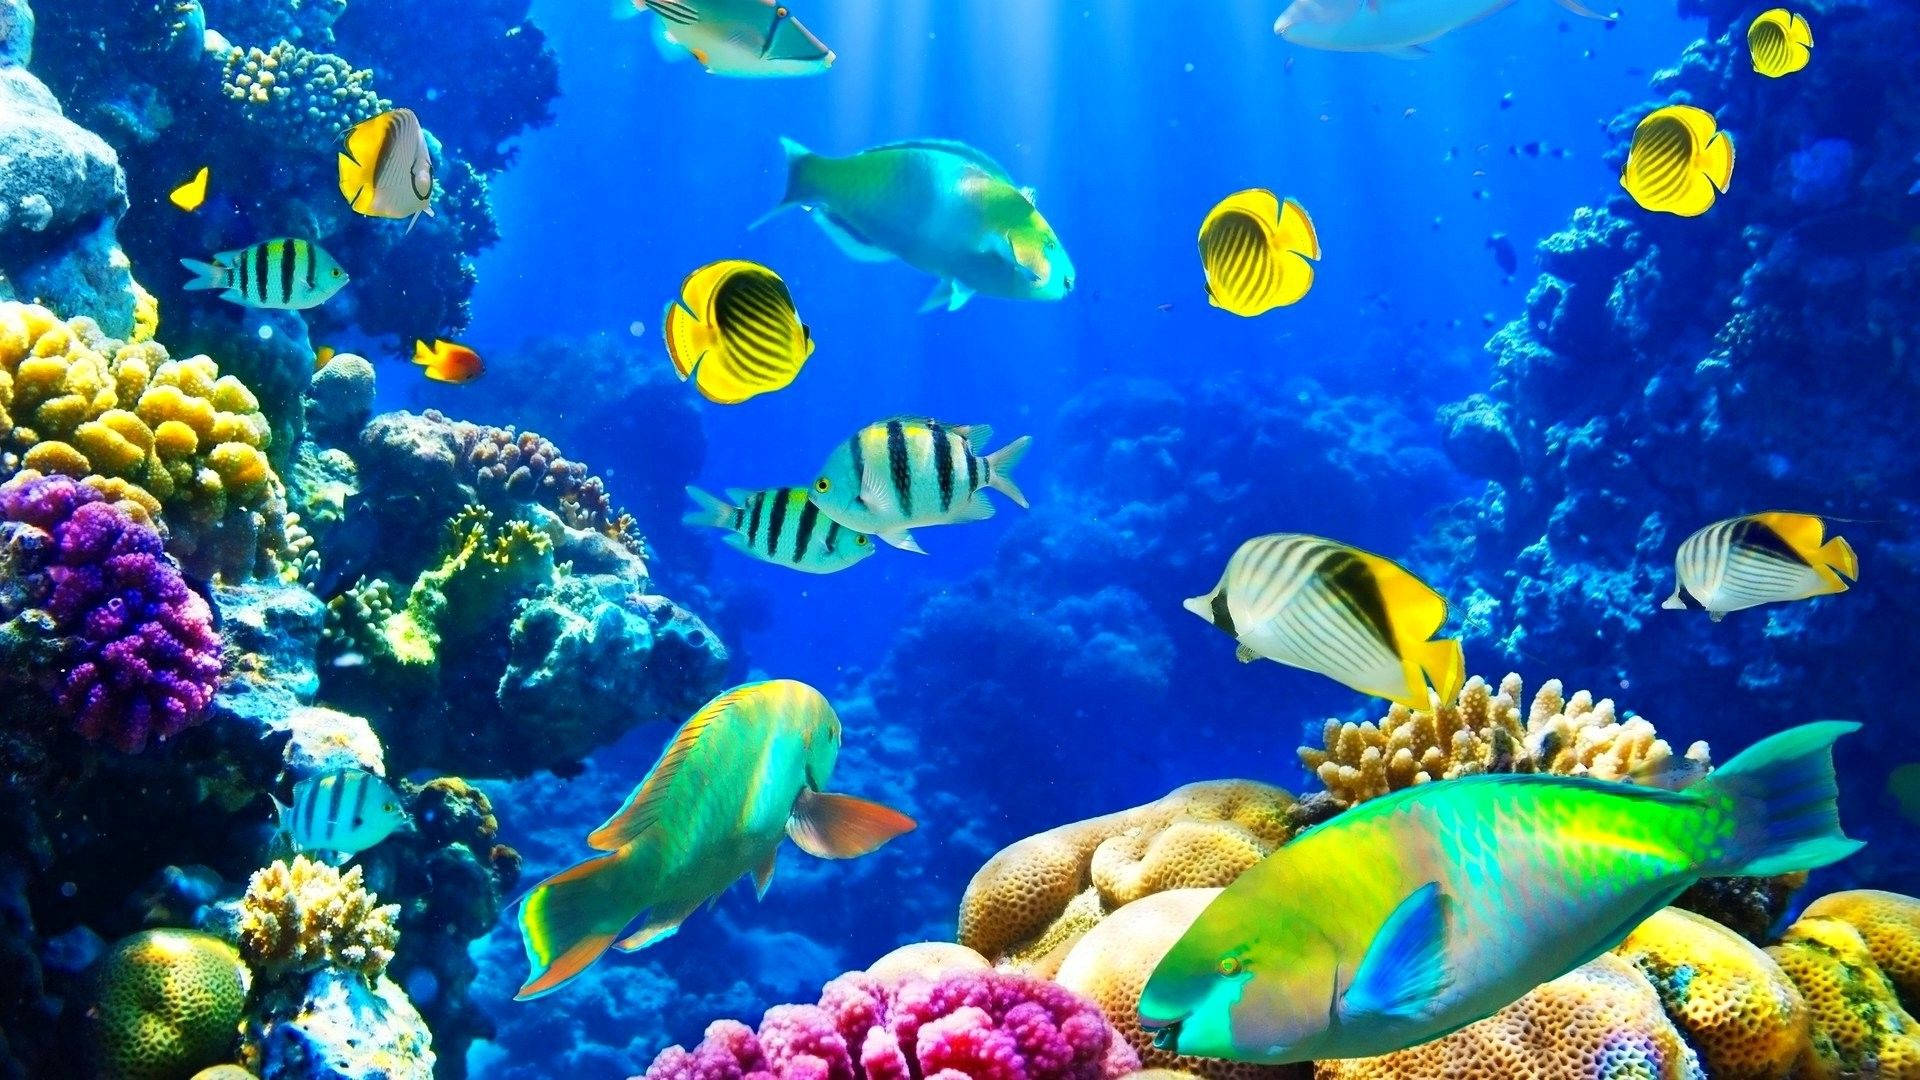 Aggregate 83+ underwater wallpaper for pc latest